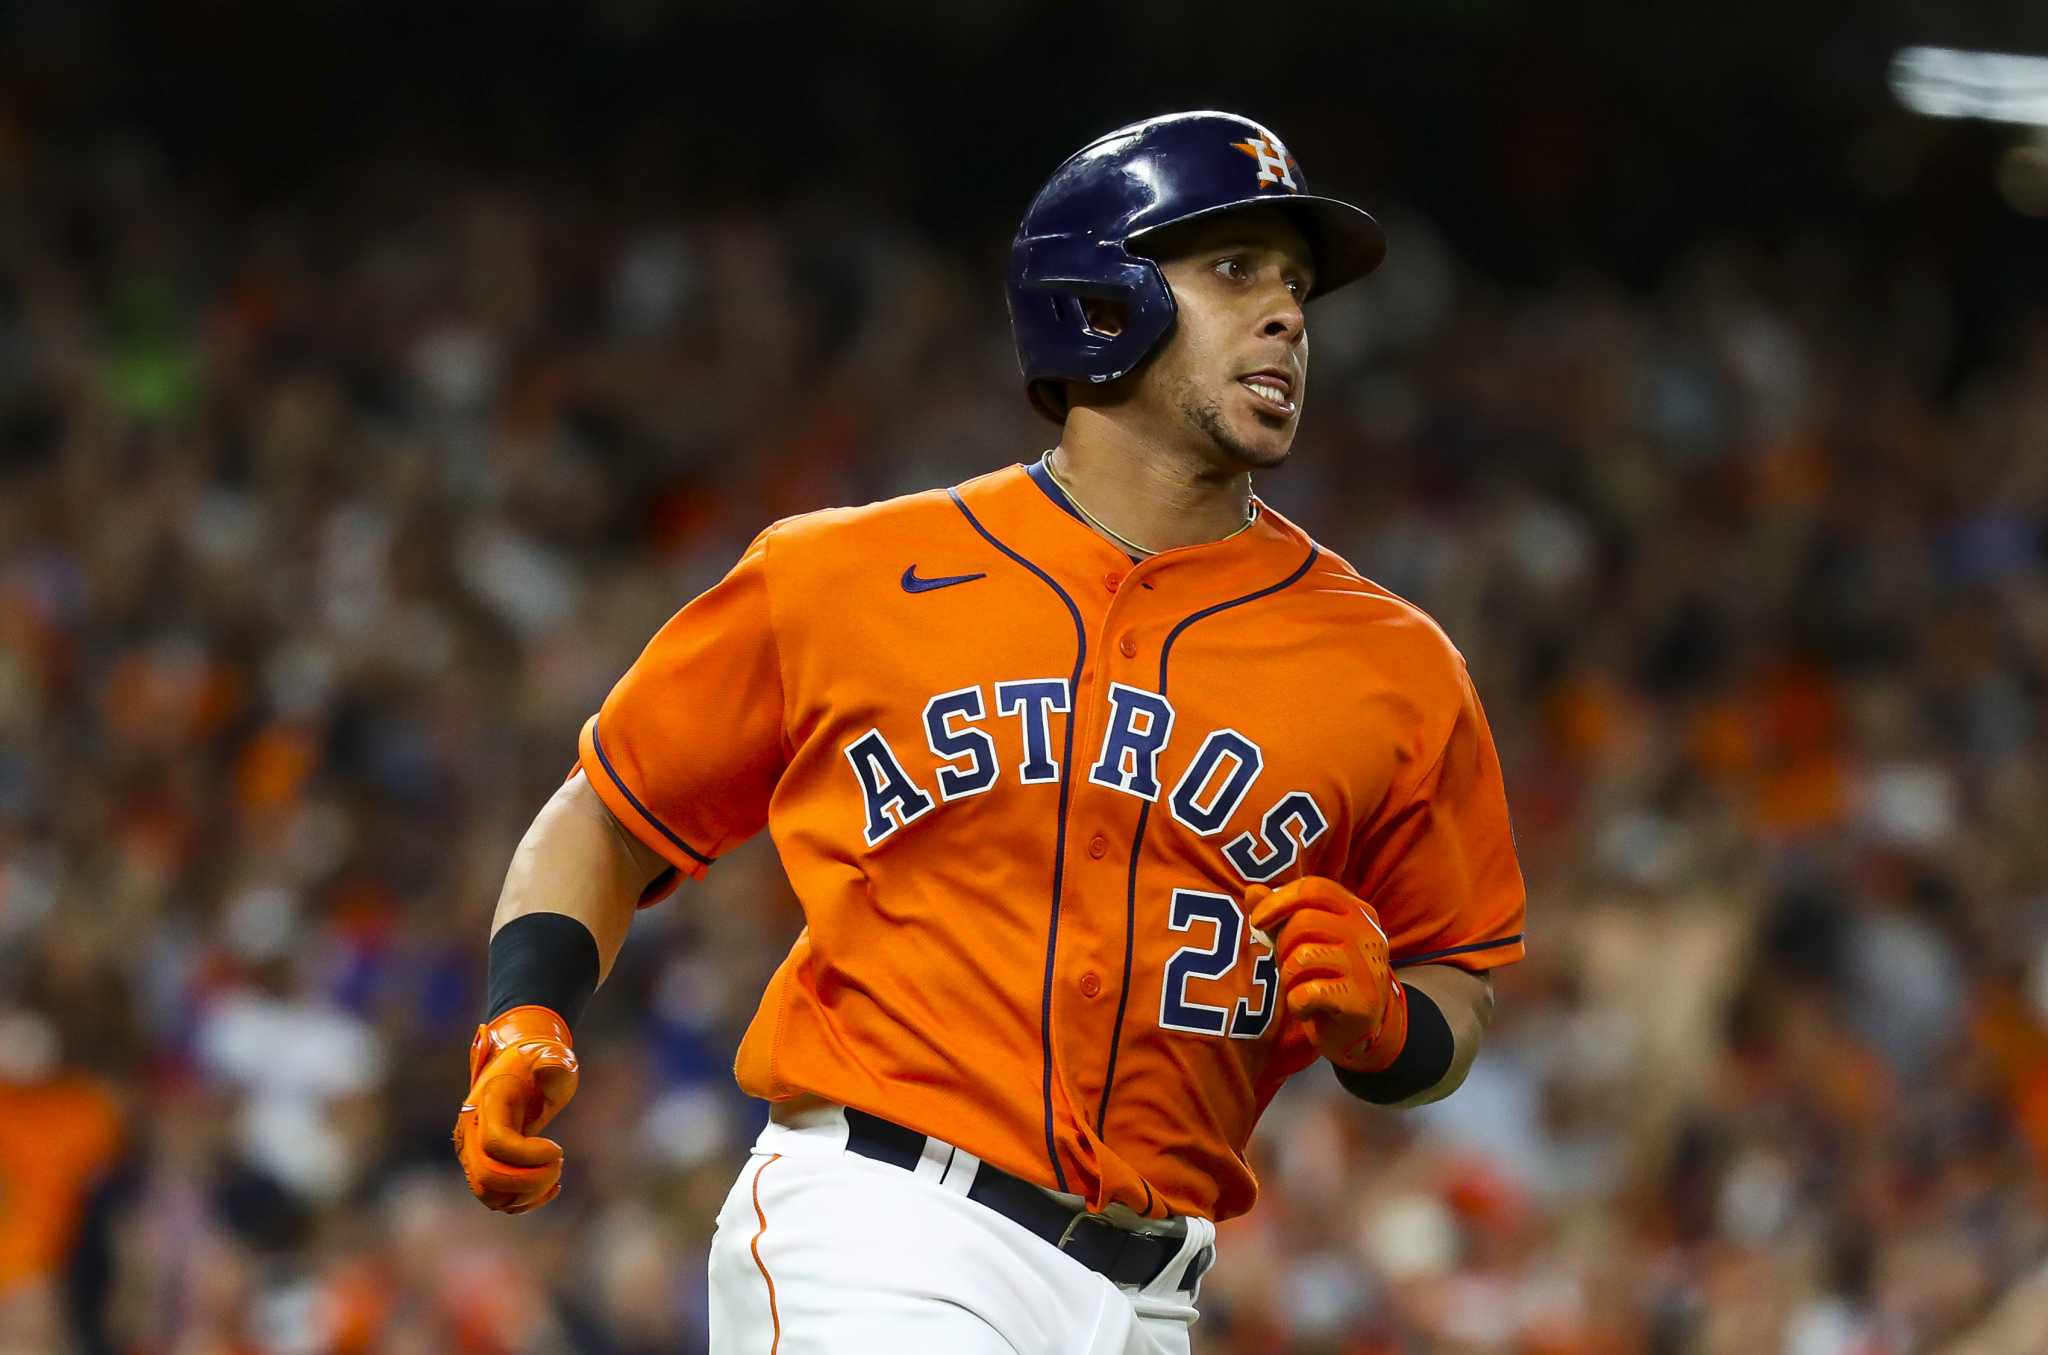 How influential is Michael Brantley to the Astros? We'll let his teammates  tell you.